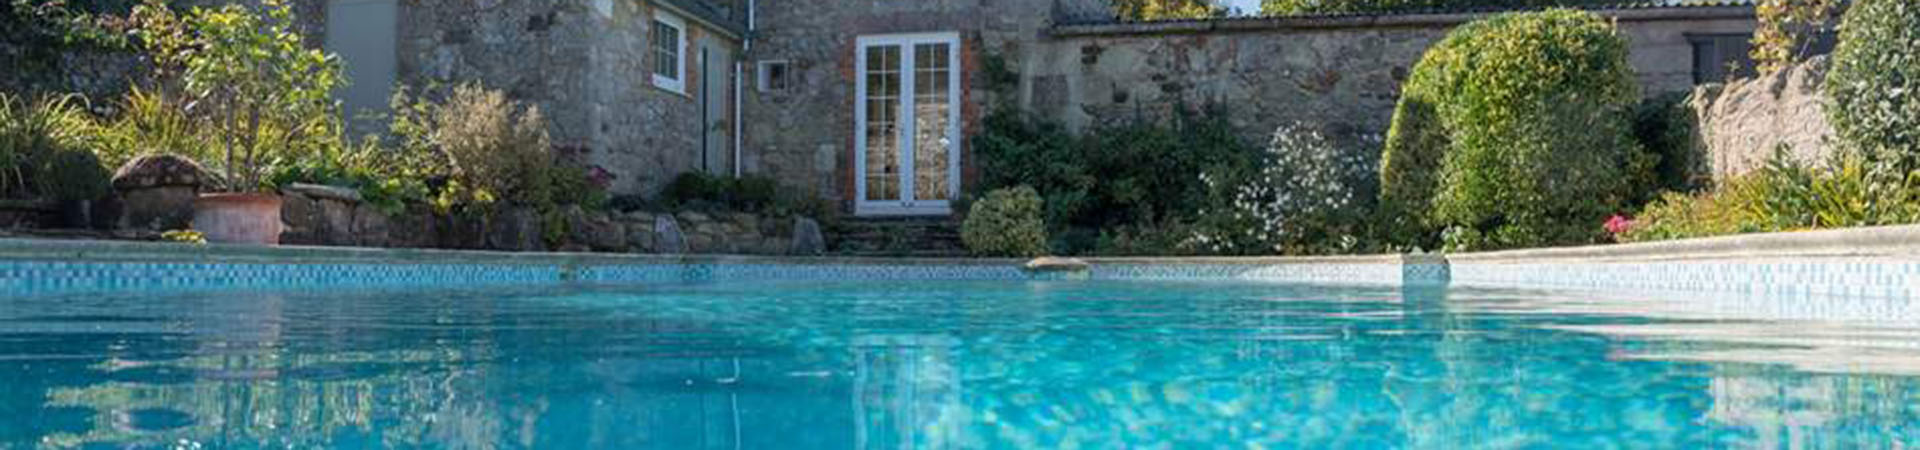 Holiday cottages with pools in The Cotswolds